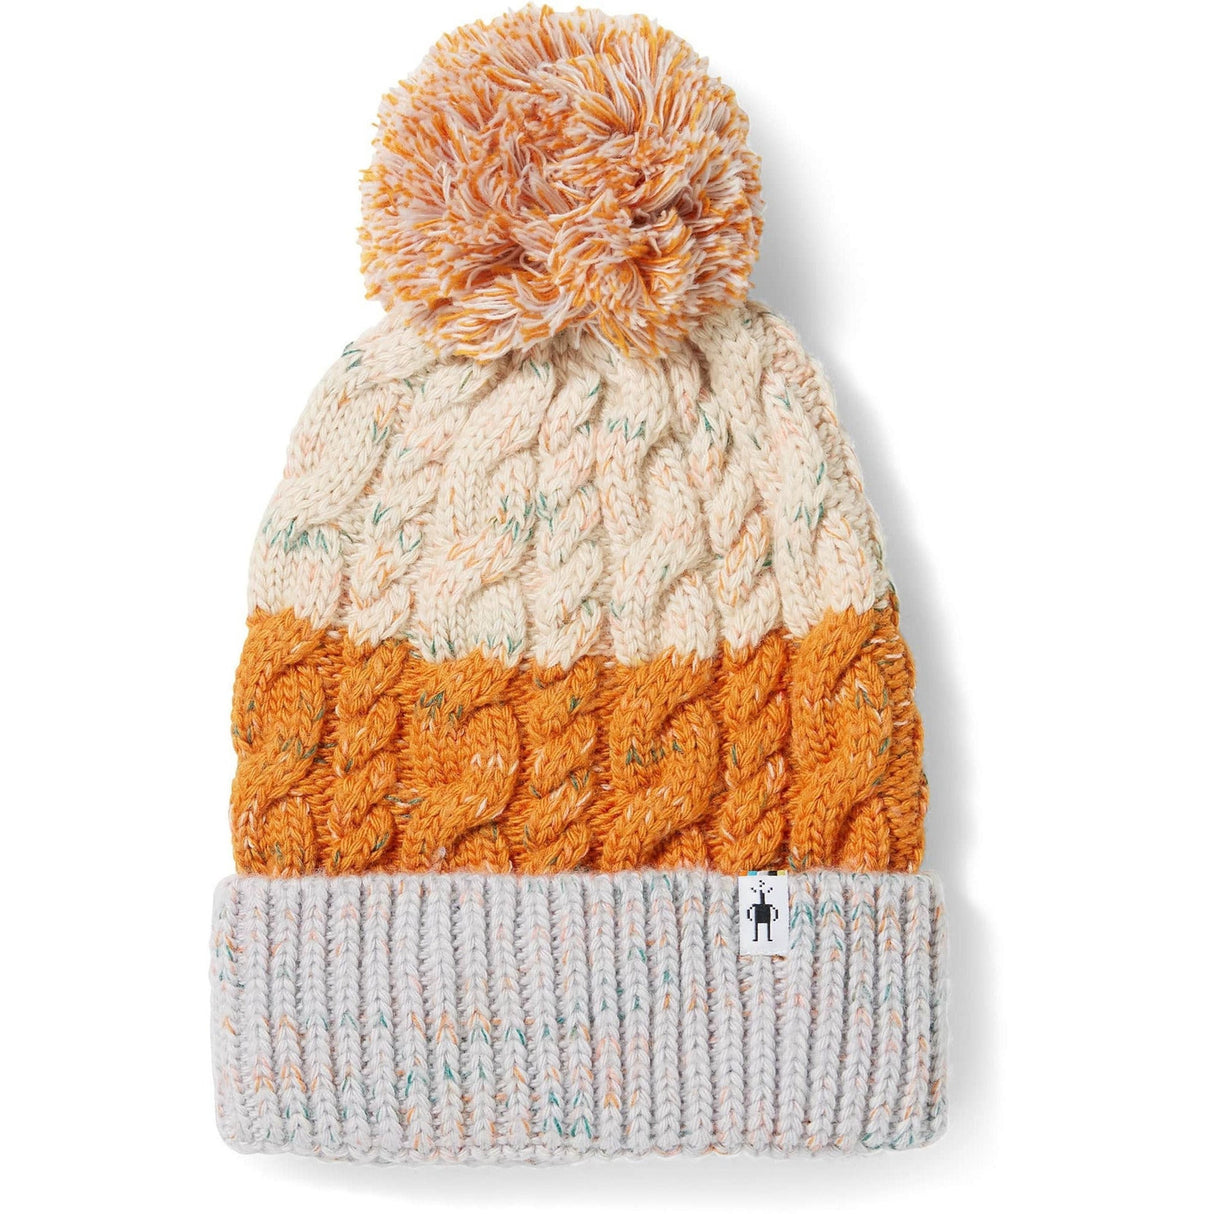 Smartwool Isto Retro Beanie  -  One Size Fits Most / Marmalade